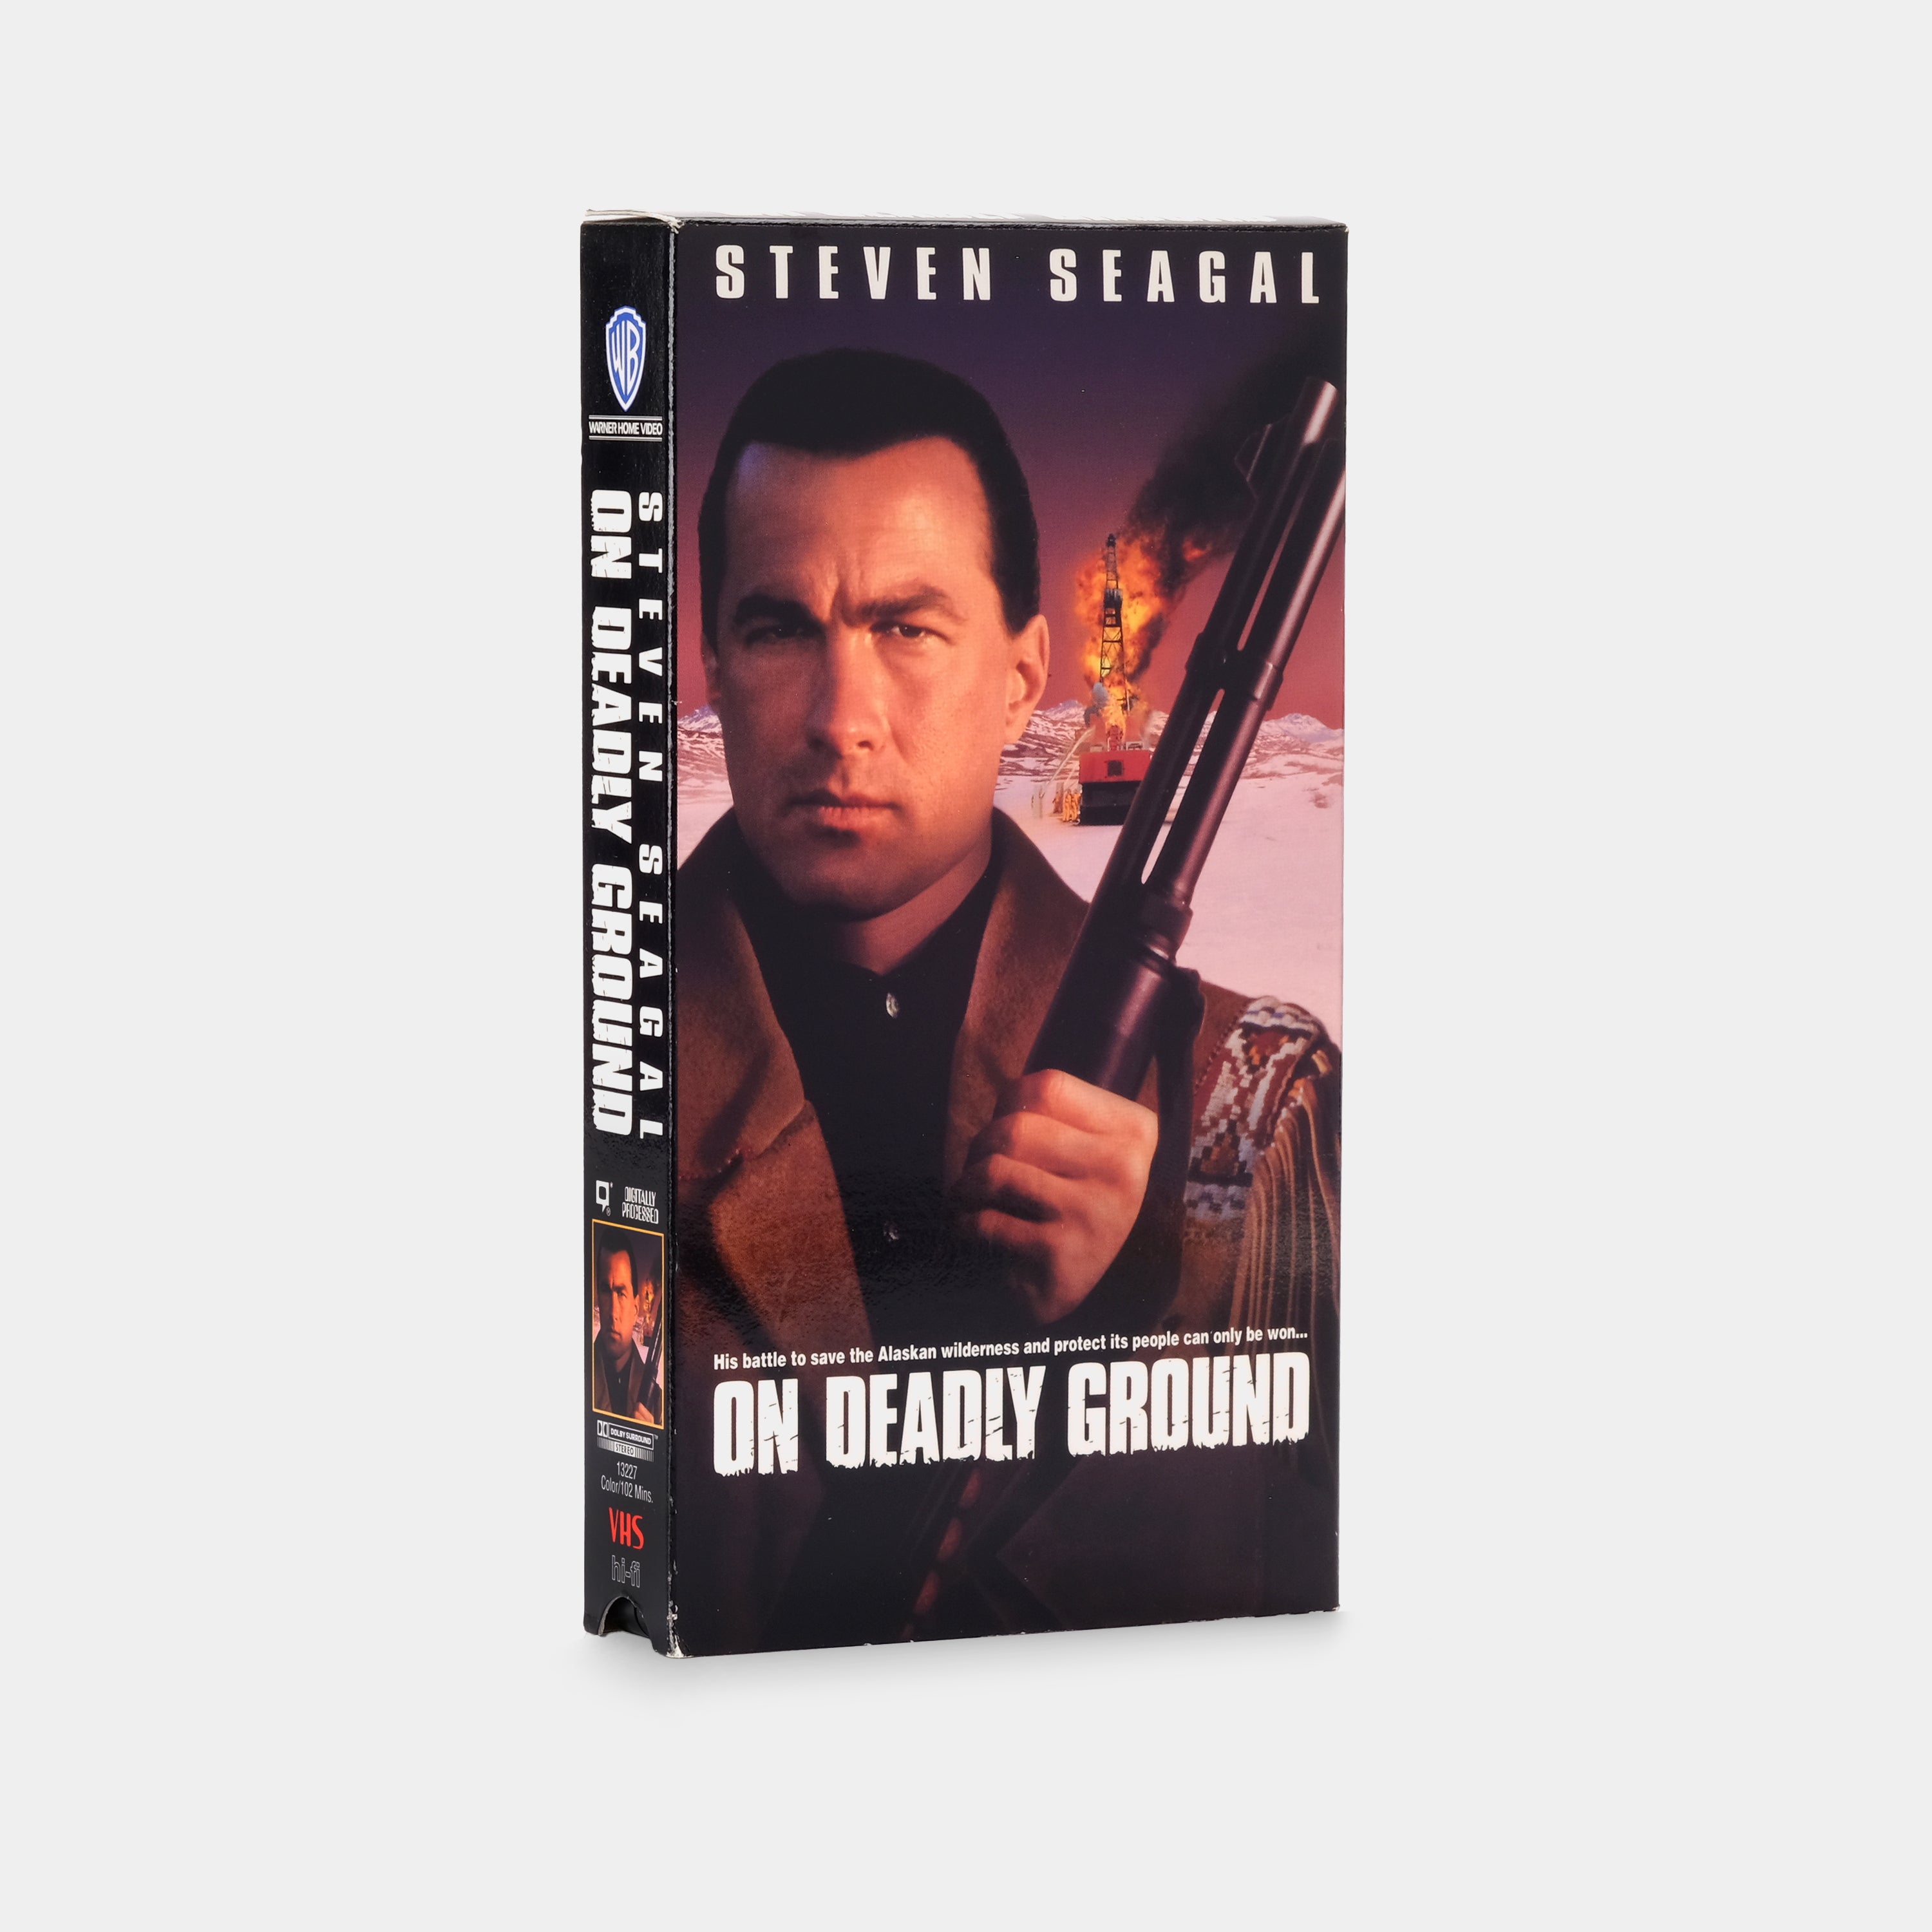 On Deadly Ground VHS Tape